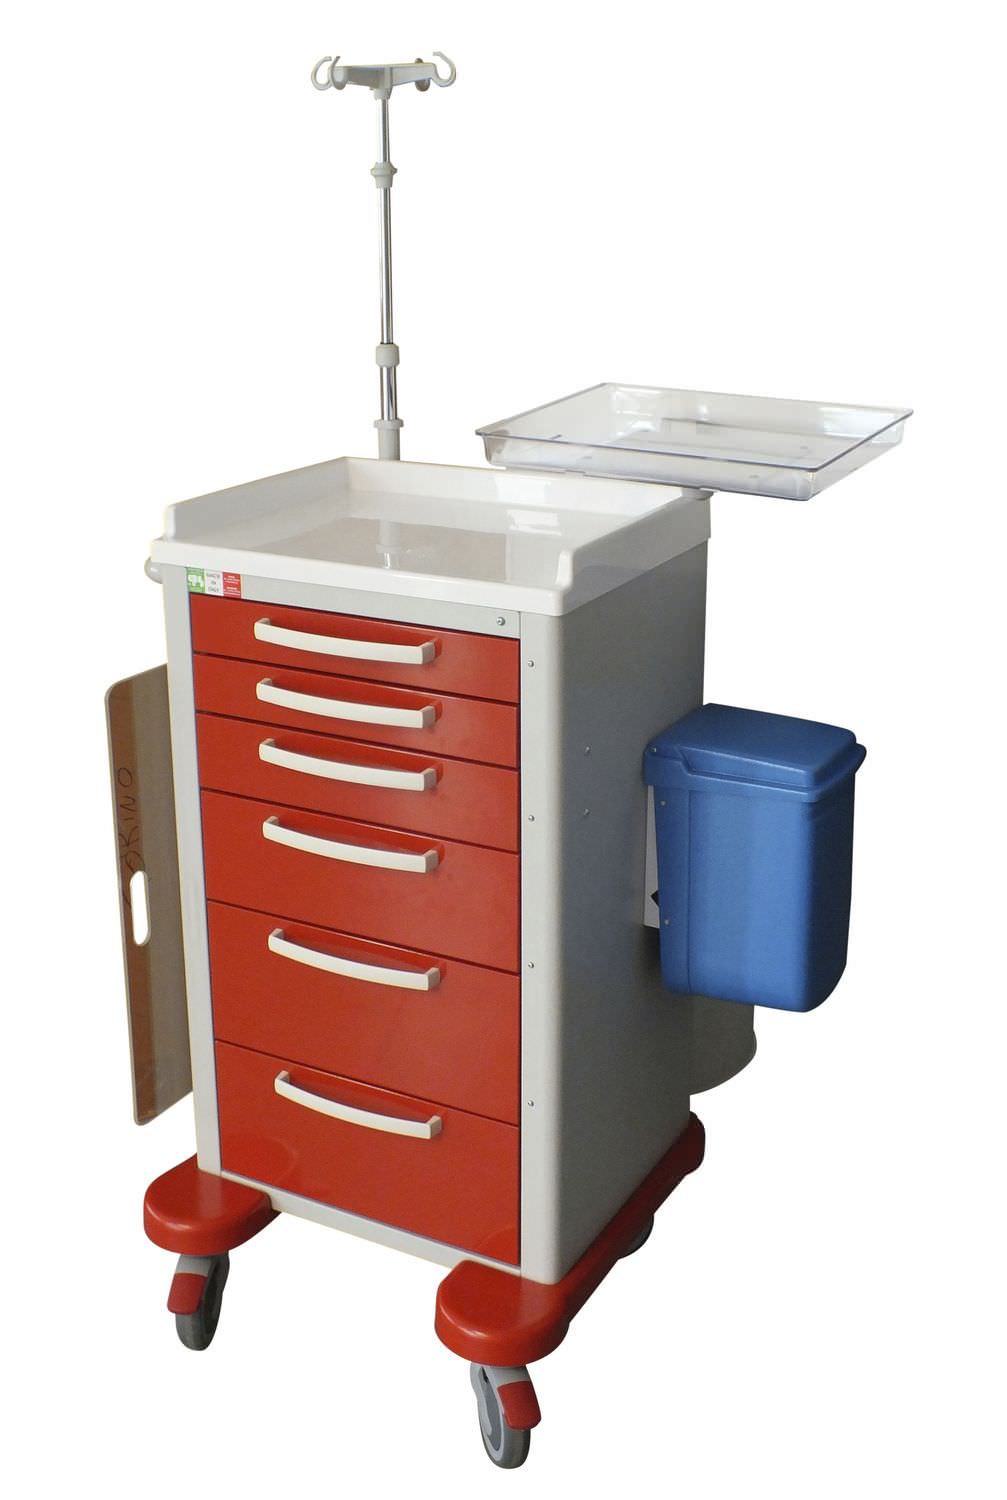 Emergency trolley / with defibrillator shelf / with IV pole GENIUS Centro Forniture Sanitarie